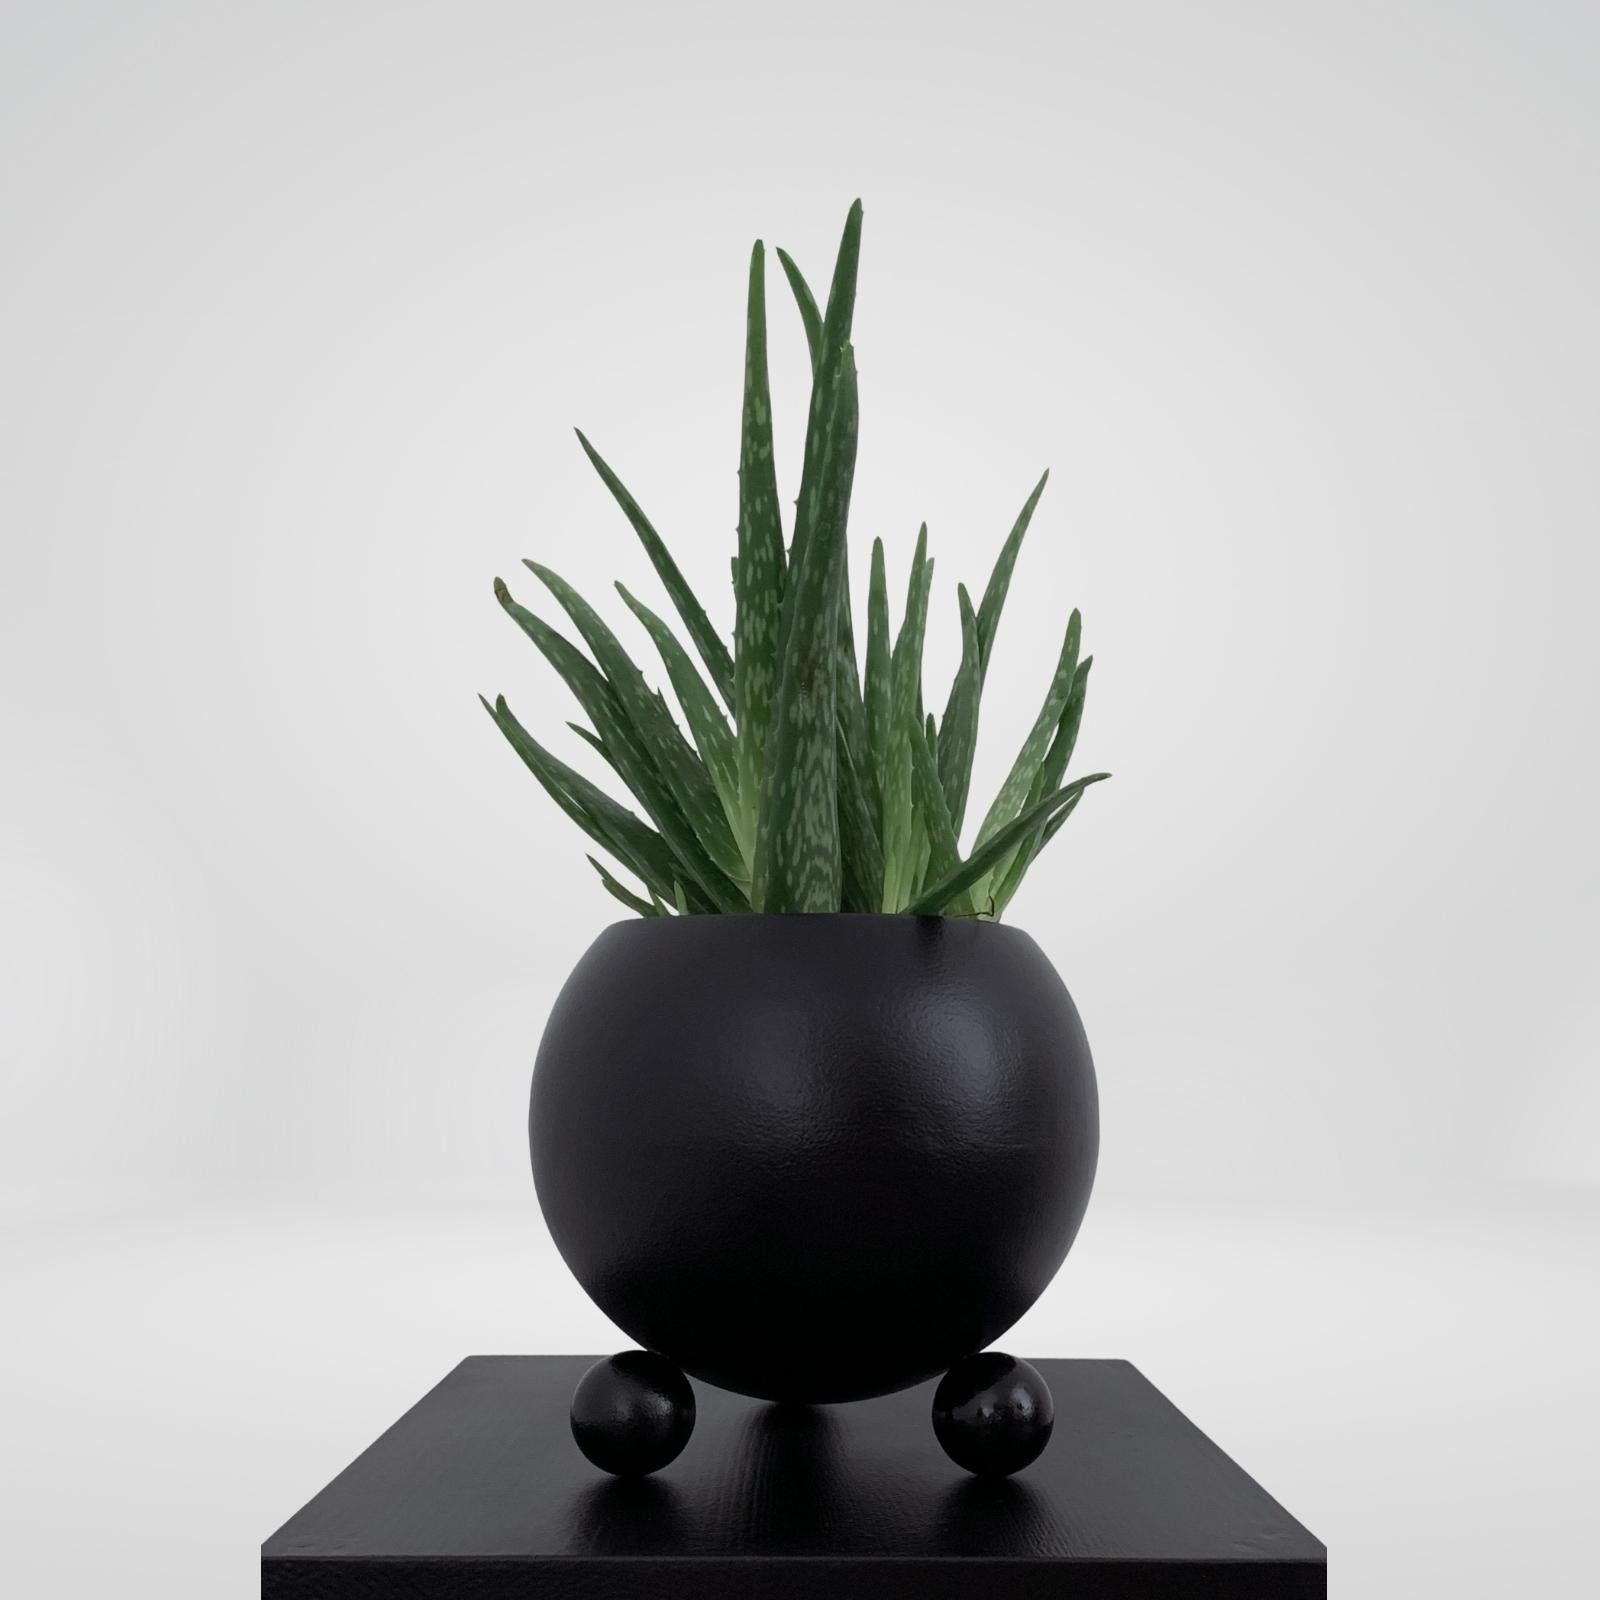 Rostyslav Kozhman Abstract Sculpture - Arty decorative hand-made plant pot, black with black glossy legs